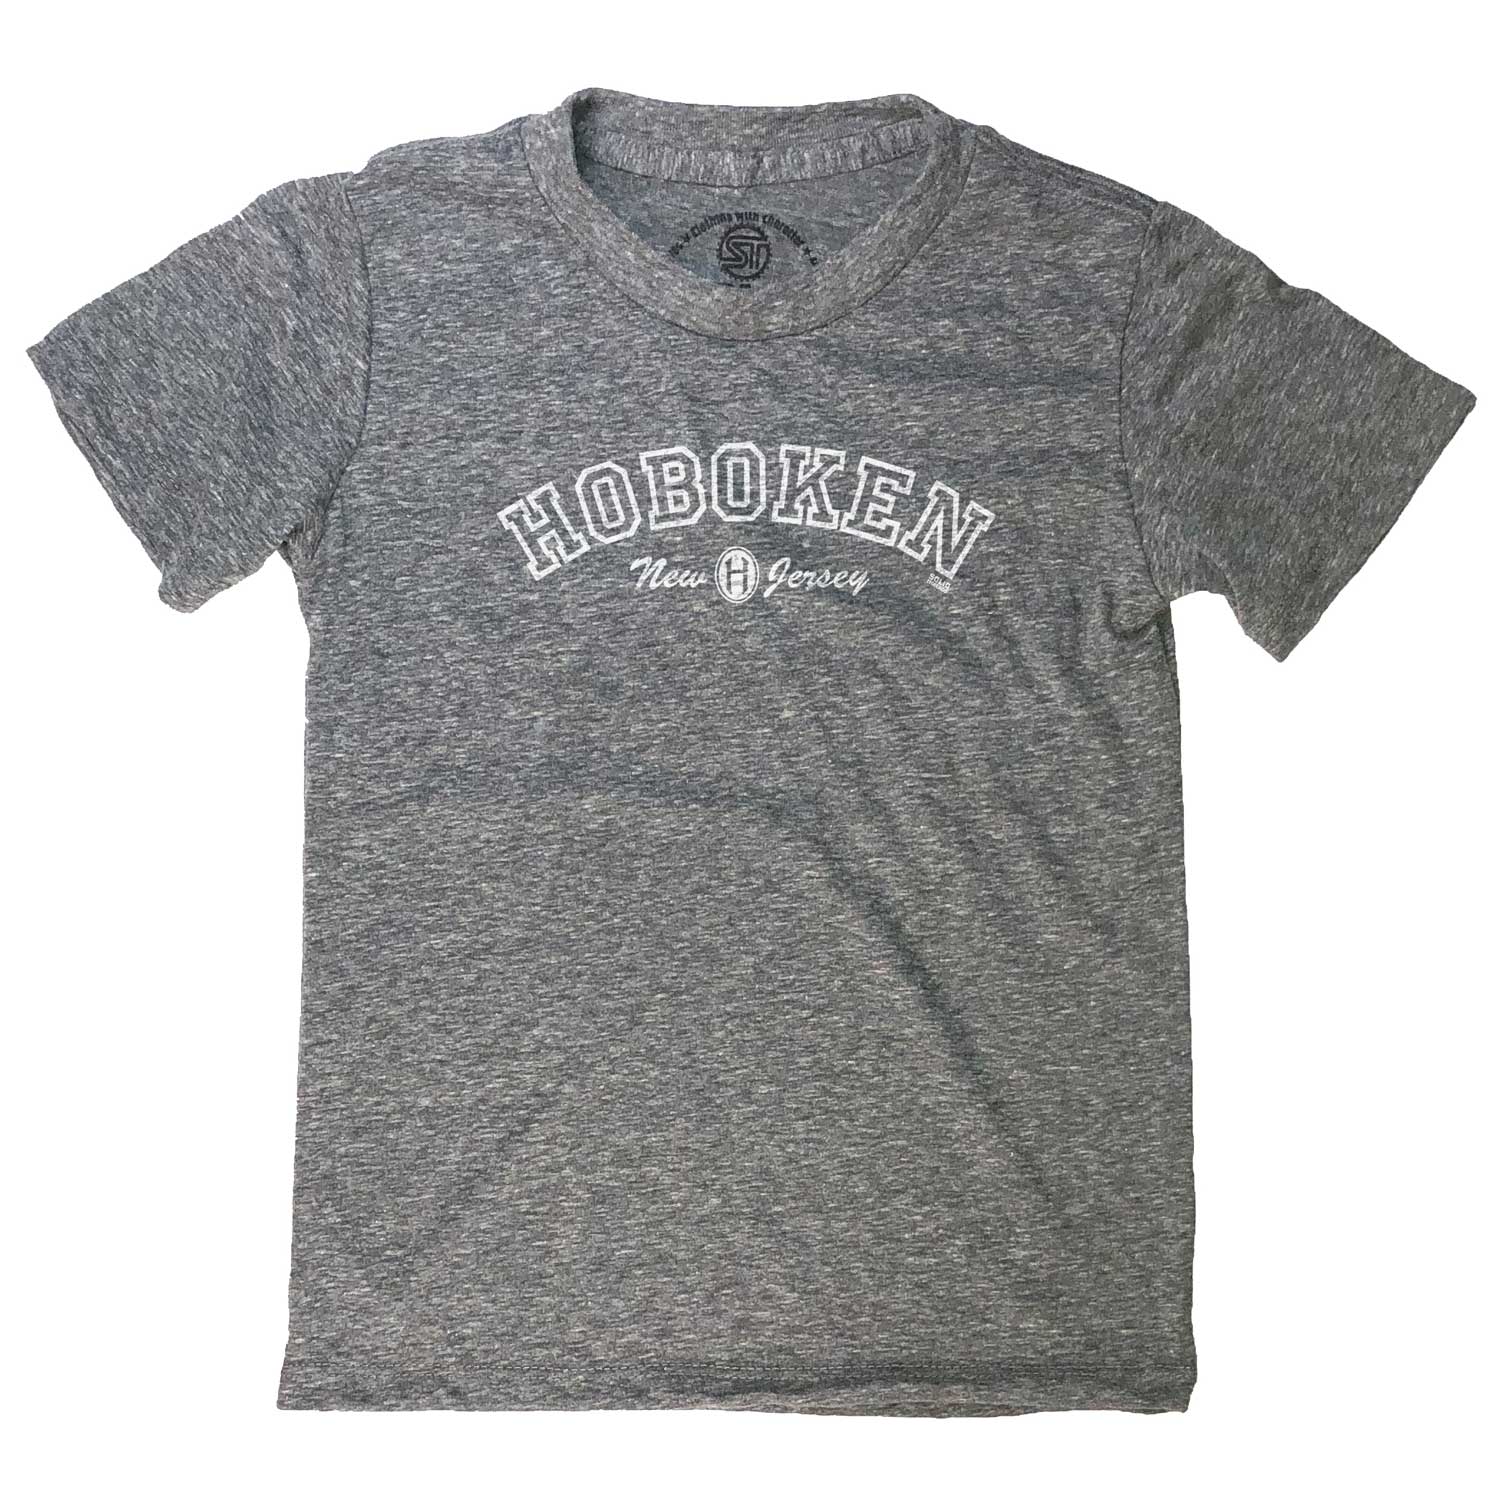 Kids Hoboken Collegiate Cool Graphic T-Shirt | Cute Retro New Jersey Soft Tee | Solid Threads